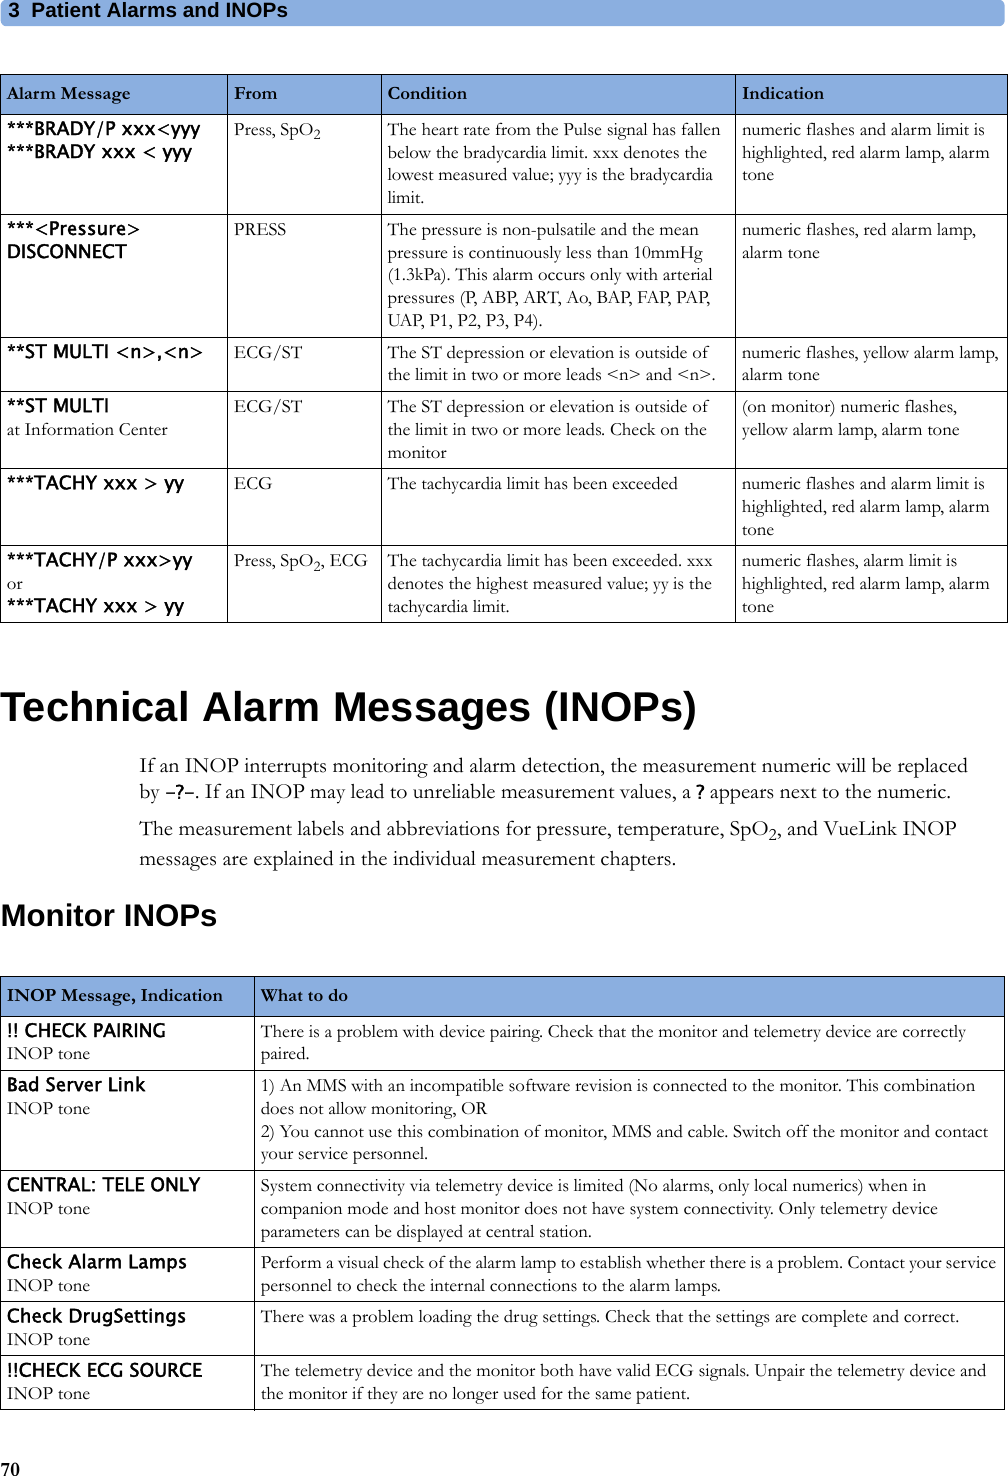 3 Patient Alarms and INOPs70Technical Alarm Messages (INOPs)If an INOP interrupts monitoring and alarm detection, the measurement numeric will be replaced by -?-. If an INOP may lead to unreliable measurement values, a ?appears next to the numeric.The measurement labels and abbreviations for pressure, temperature, SpO2, and VueLink INOP messages are explained in the individual measurement chapters.Monitor INOPs***BRADY/P xxx&lt;yyy***BRADY xxx &lt; yyyPress, SpO2The heart rate from the Pulse signal has fallen below the bradycardia limit. xxx denotes the lowest measured value; yyy is the bradycardia limit.numeric flashes and alarm limit is highlighted, red alarm lamp, alarm tone***&lt;Pressure&gt; DISCONNECTPRESS The pressure is non-pulsatile and the mean pressure is continuously less than 10mmHg (1.3kPa). This alarm occurs only with arterial pres su re s (P,  AB P, ART, A o,  BA P, FA P, PA P, UAP, P1, P2, P3, P4).numeric flashes, red alarm lamp, alarm tone**ST MULTI &lt;n&gt;,&lt;n&gt; ECG/ST The ST depression or elevation is outside of the limit in two or more leads &lt;n&gt; and &lt;n&gt;.numeric flashes, yellow alarm lamp, alarm tone**ST MULTIat Information CenterECG/ST The ST depression or elevation is outside of the limit in two or more leads. Check on the monitor (on monitor) numeric flashes, yellow alarm lamp, alarm tone***TACHY xxx &gt; yy ECG The tachycardia limit has been exceeded numeric flashes and alarm limit is highlighted, red alarm lamp, alarm tone***TACHY/P xxx&gt;yyor***TACHY xxx &gt; yyPress, SpO2, ECG The tachycardia limit has been exceeded. xxx denotes the highest measured value; yy is the tachycardia limit.numeric flashes, alarm limit is highlighted, red alarm lamp, alarm toneAlarm Message From Condition IndicationINOP Message, Indication What to do !! CHECK PAIRINGINOP toneThere is a problem with device pairing. Check that the monitor and telemetry device are correctly paired.Bad Server LinkINOP tone1) An MMS with an incompatible software revision is connected to the monitor. This combination does not allow monitoring, OR 2) You cannot use this combination of monitor, MMS and cable. Switch off the monitor and contact your service personnel.CENTRAL: TELE ONLYINOP toneSystem connectivity via telemetry device is limited (No alarms, only local numerics) when in companion mode and host monitor does not have system connectivity. Only telemetry device parameters can be displayed at central station.Check Alarm LampsINOP tonePerform a visual check of the alarm lamp to establish whether there is a problem. Contact your service personnel to check the internal connections to the alarm lamps.Check DrugSettingsINOP toneThere was a problem loading the drug settings. Check that the settings are complete and correct.!!CHECK ECG SOURCEINOP toneThe telemetry device and the monitor both have valid ECG signals. Unpair the telemetry device and the monitor if they are no longer used for the same patient.